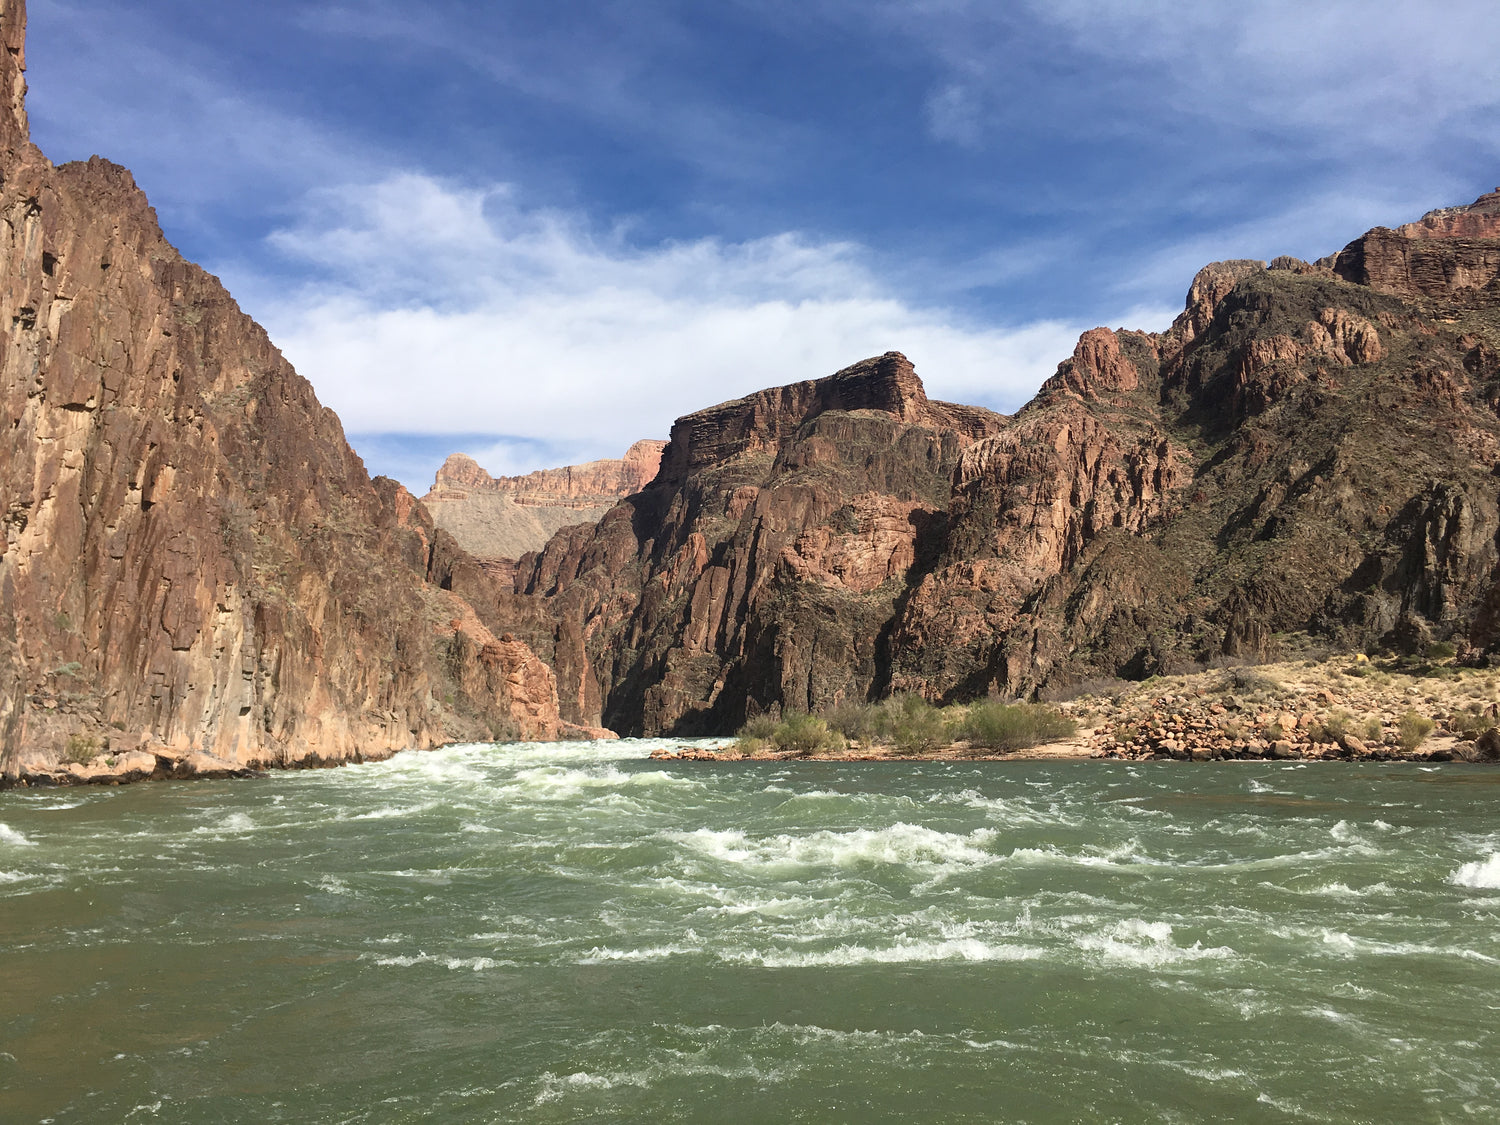 Four ways to stay comfy, happy, and healthy on your Grand Canyon rafting trip by Caroline "Karaoke" Hinchliff